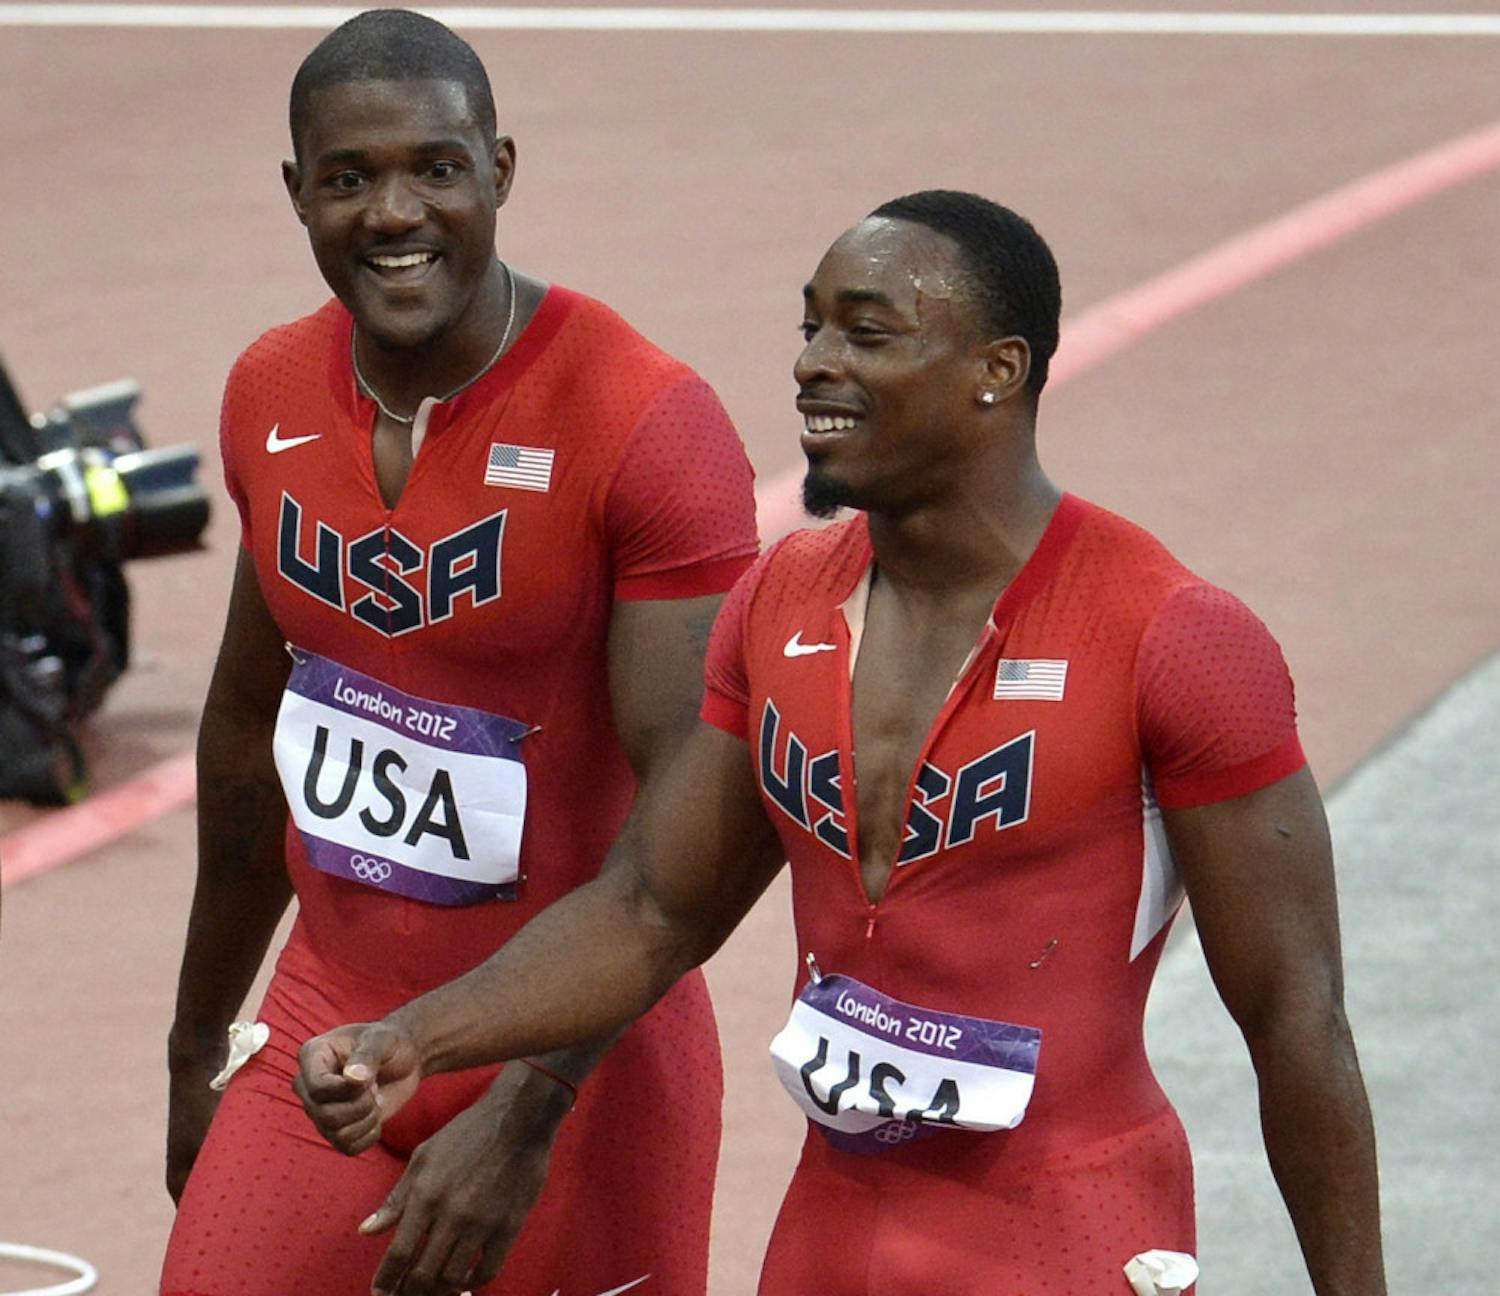 Jeff Demps (right) smiles during the 2012 Summer Olympics in London, England.